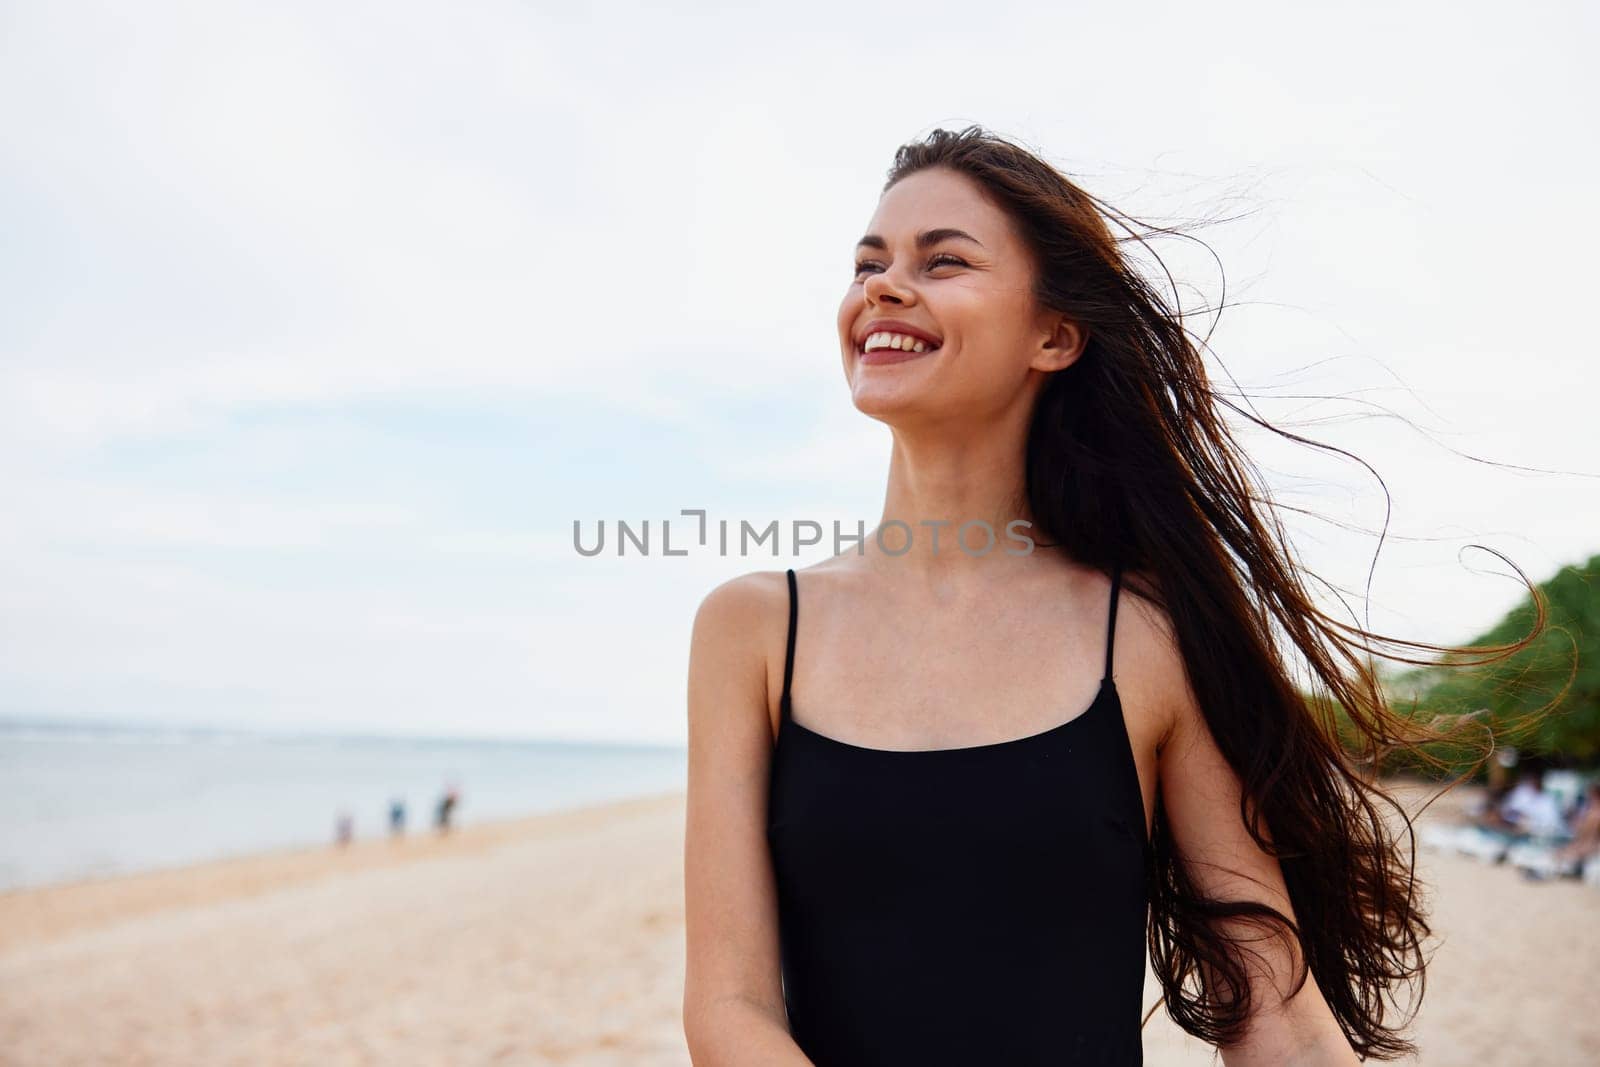 sea woman summer beach sand beauty hair peaceful smile ocean nature girl dress leisure vacation sunset long adult holiday caucasian smiling young